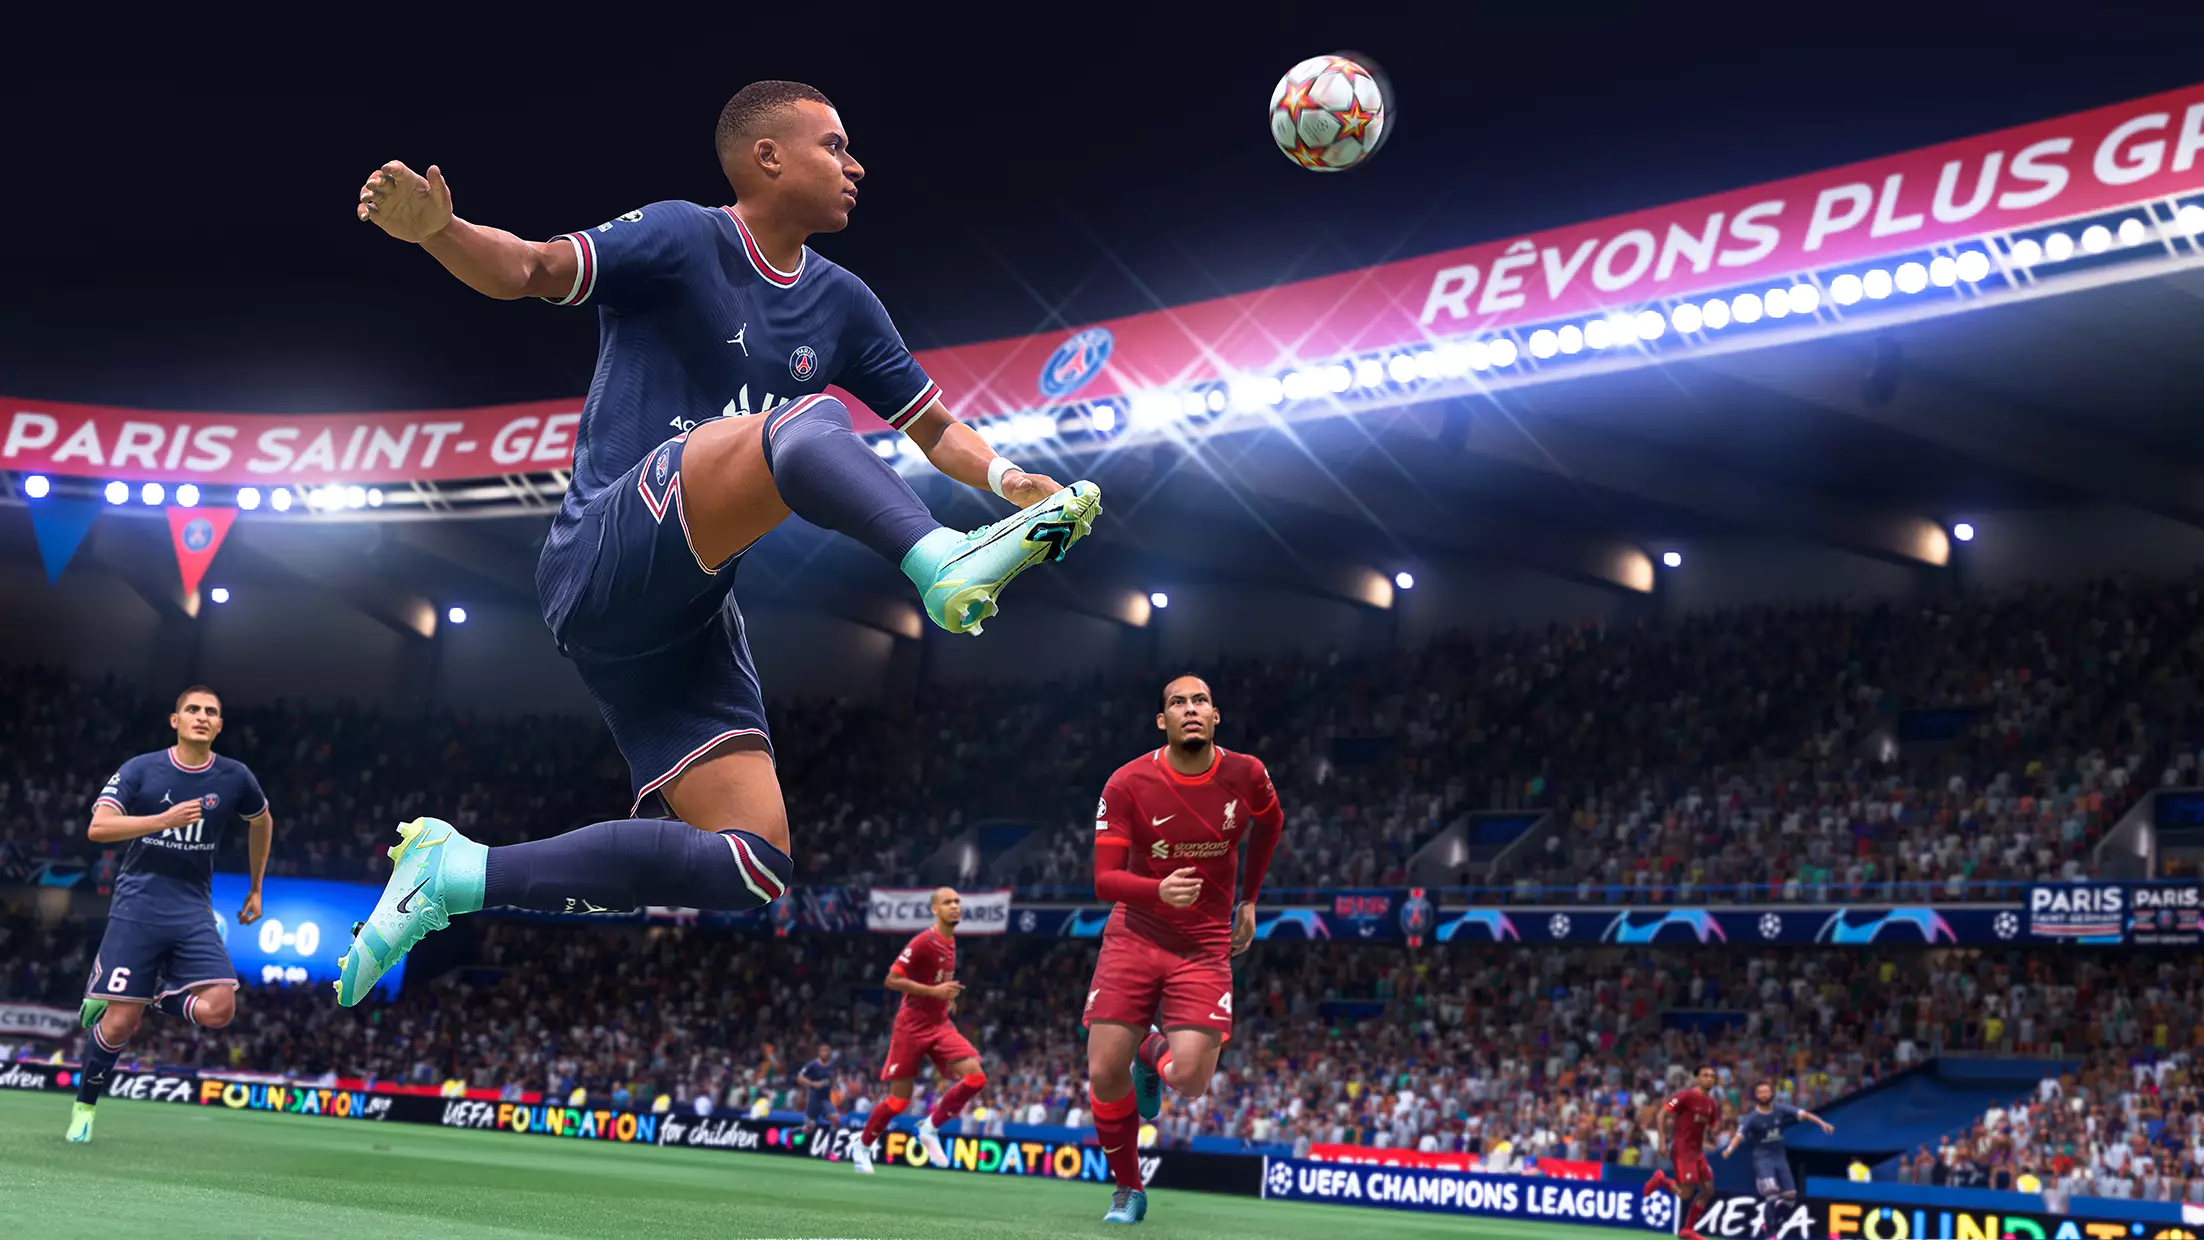 A leak has revealed that there will be some big changes coming to Ultimate Team on FIFA 22 later this year